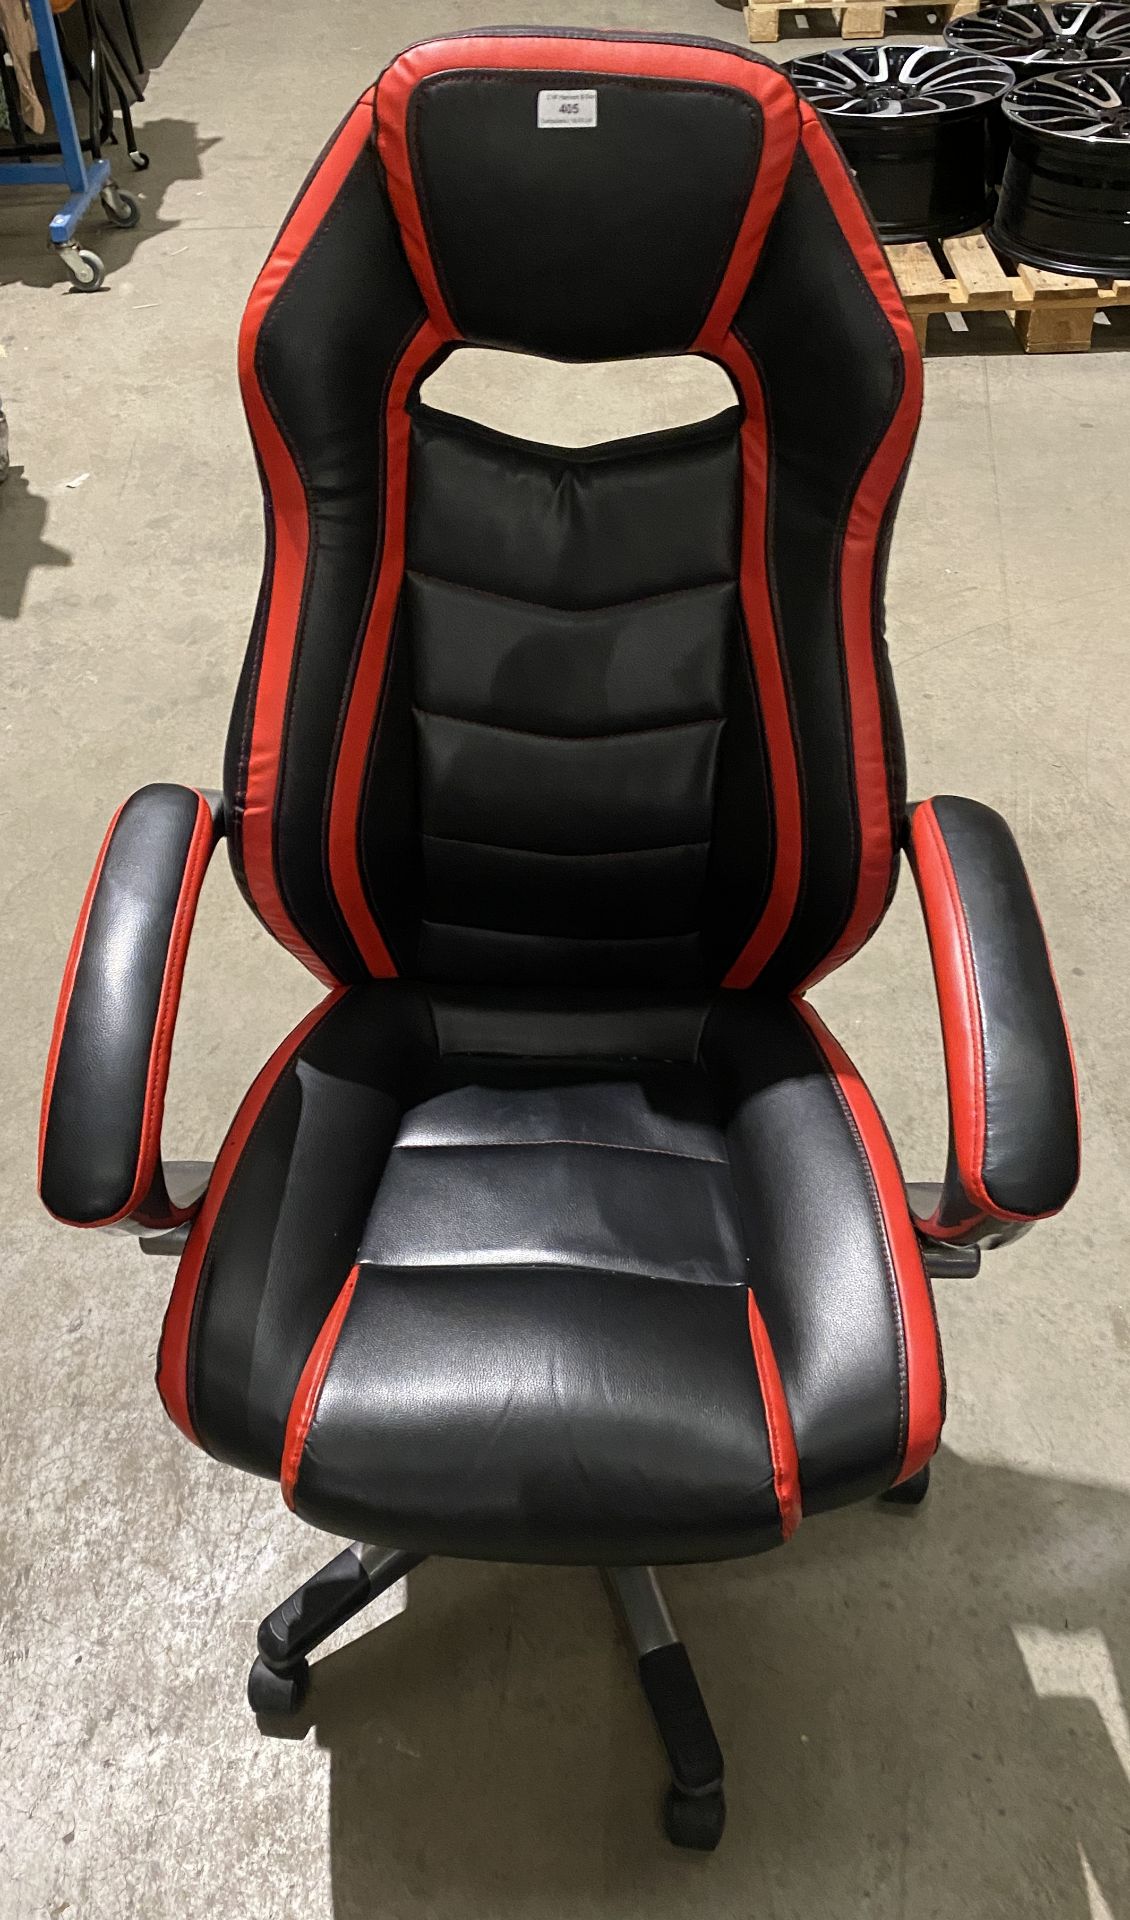 Black and red leather upholstered swivel armchair/gaming chair (Saleroom location: Aisle 1) - Image 2 of 4